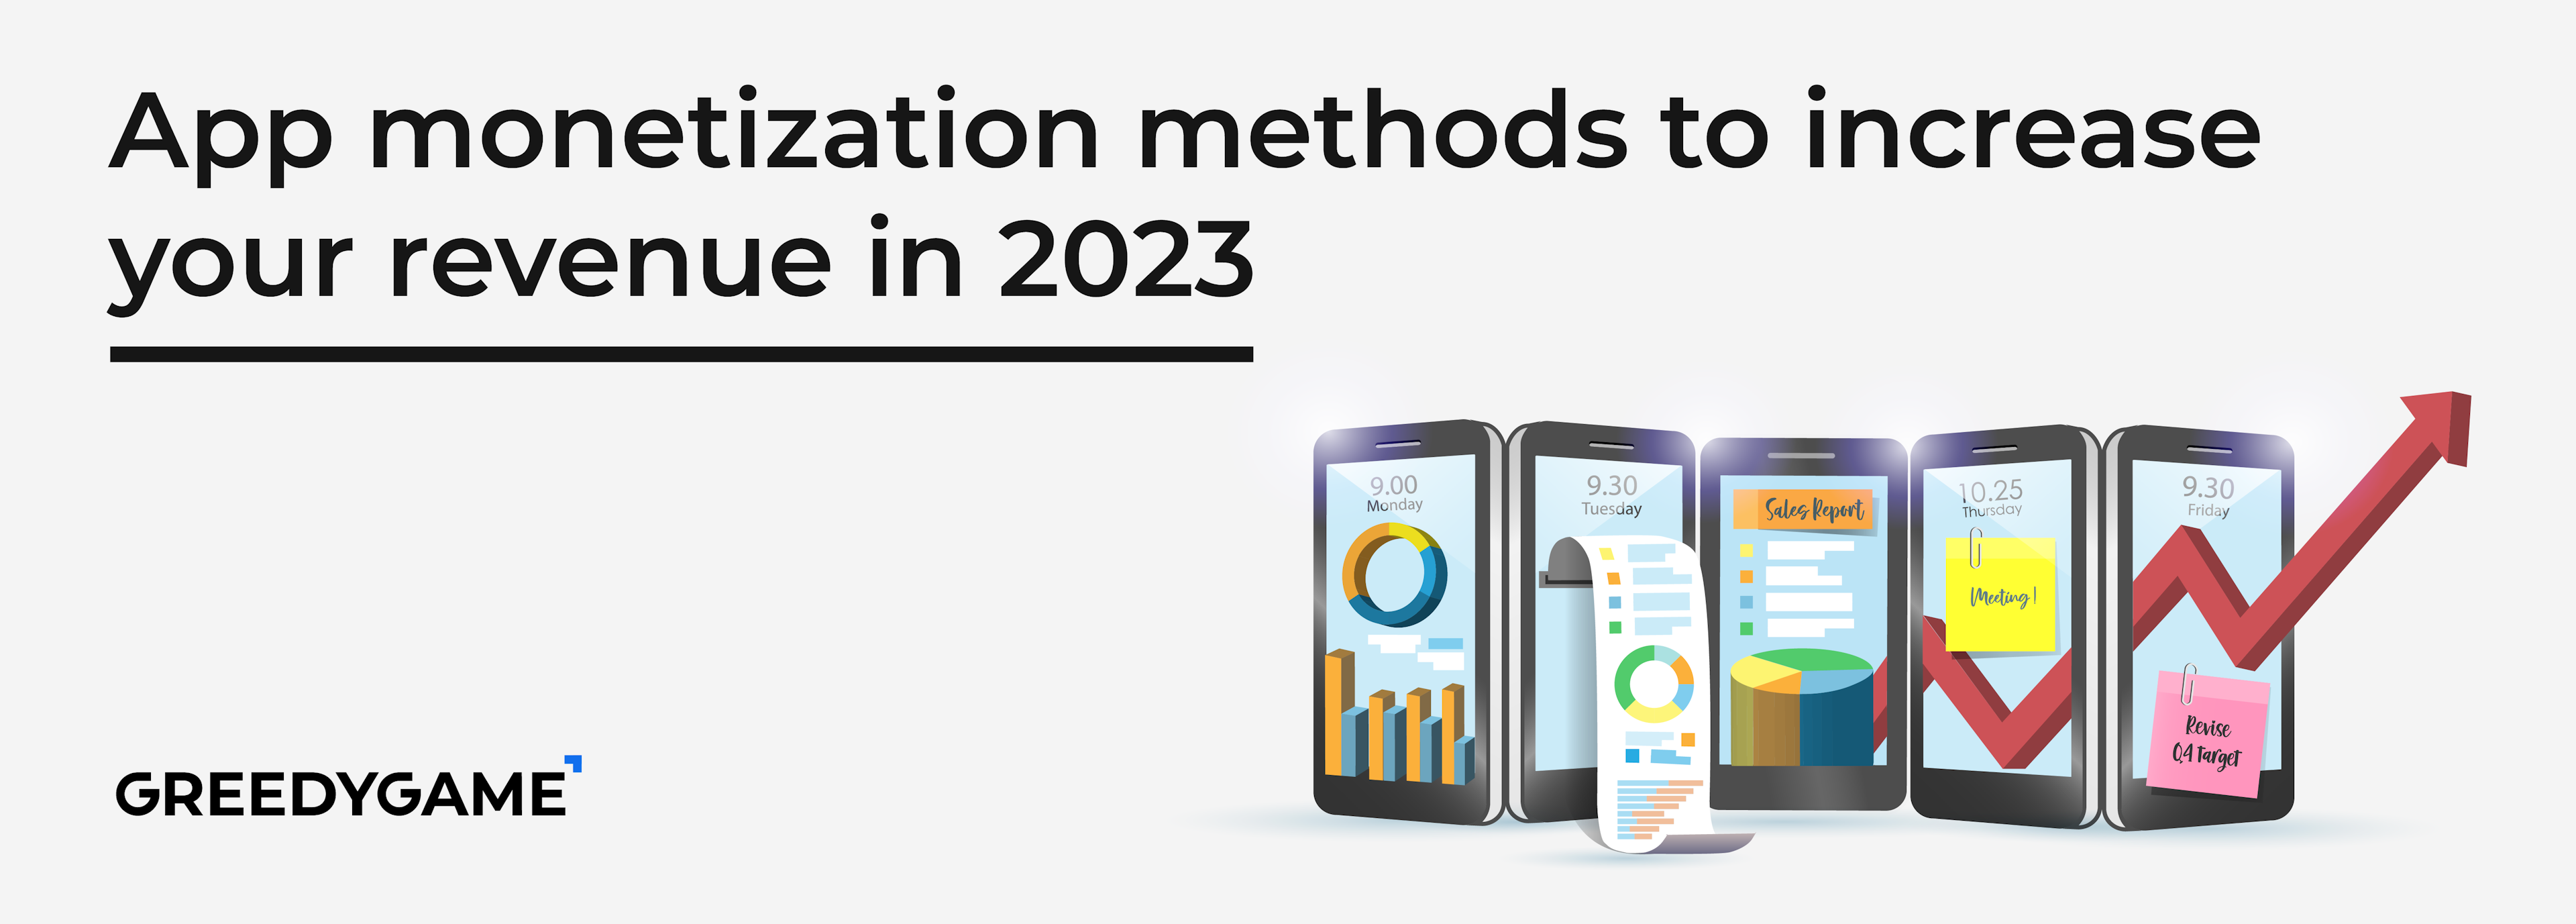 App monetization methods to increase your revenue in 2023